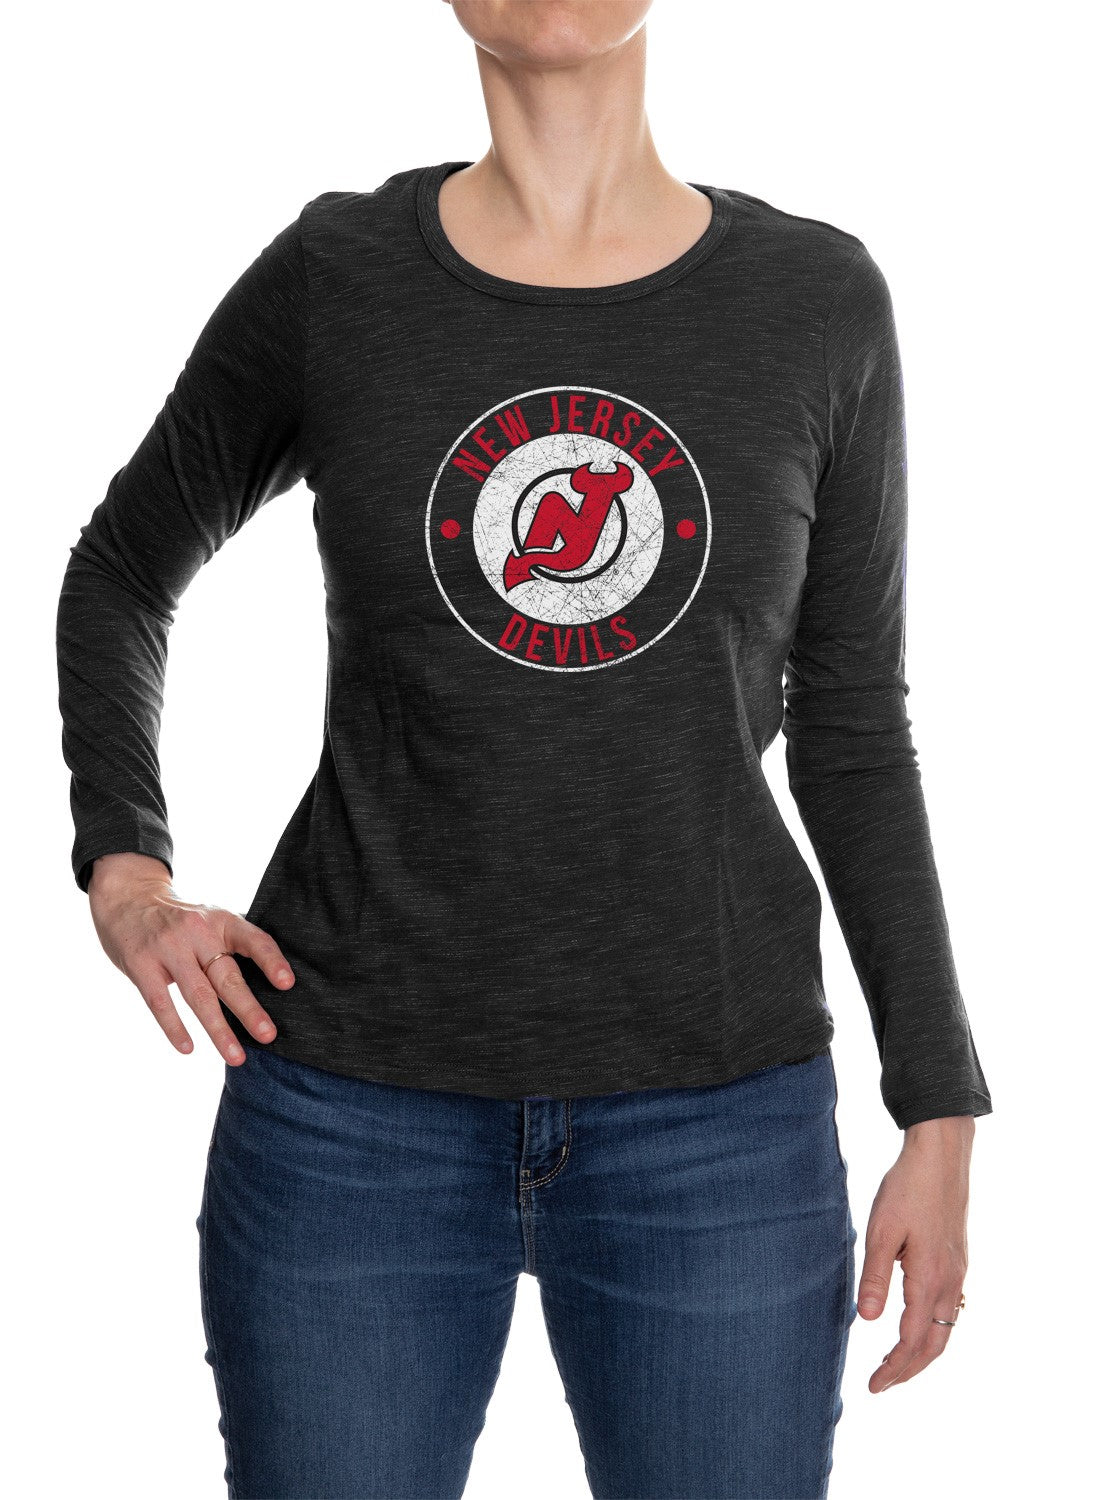 New Jersey Devils Distressed Logo Long Sleeve Shirt for Women in Black Front View